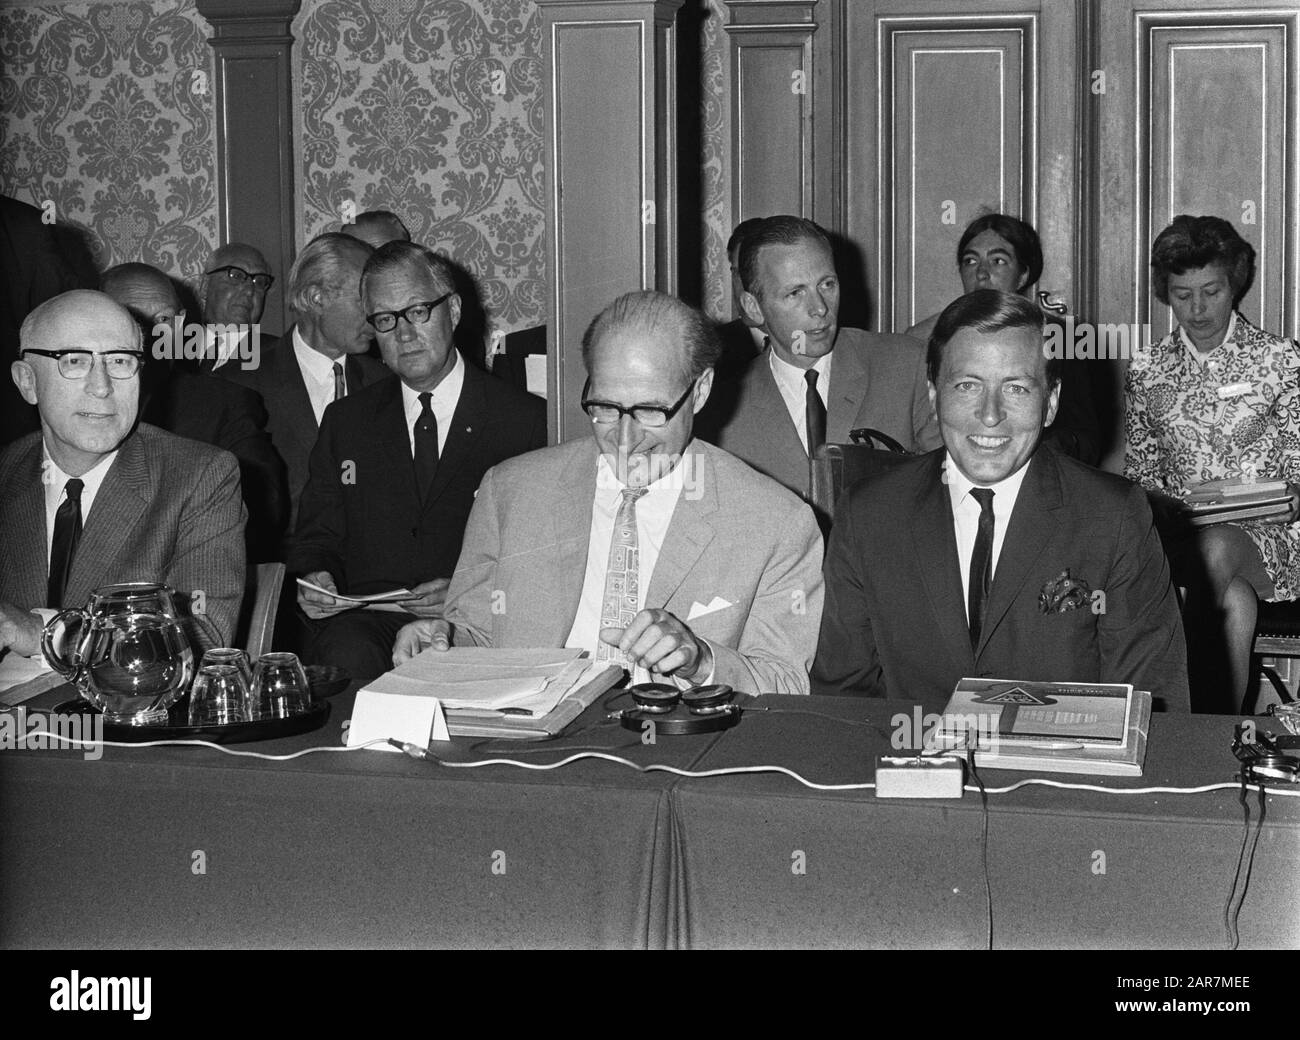 Pr. Claus at 6th Assembly Generale Europa Nostra in building Kon. NL Acad. Know. Adam, burgm. Samkalden, Min. Schut, Prins Claus Date: June 12, 1969 Location: Amsterdam, Noord-Holland Personal name: Claus, prince Stock Photo